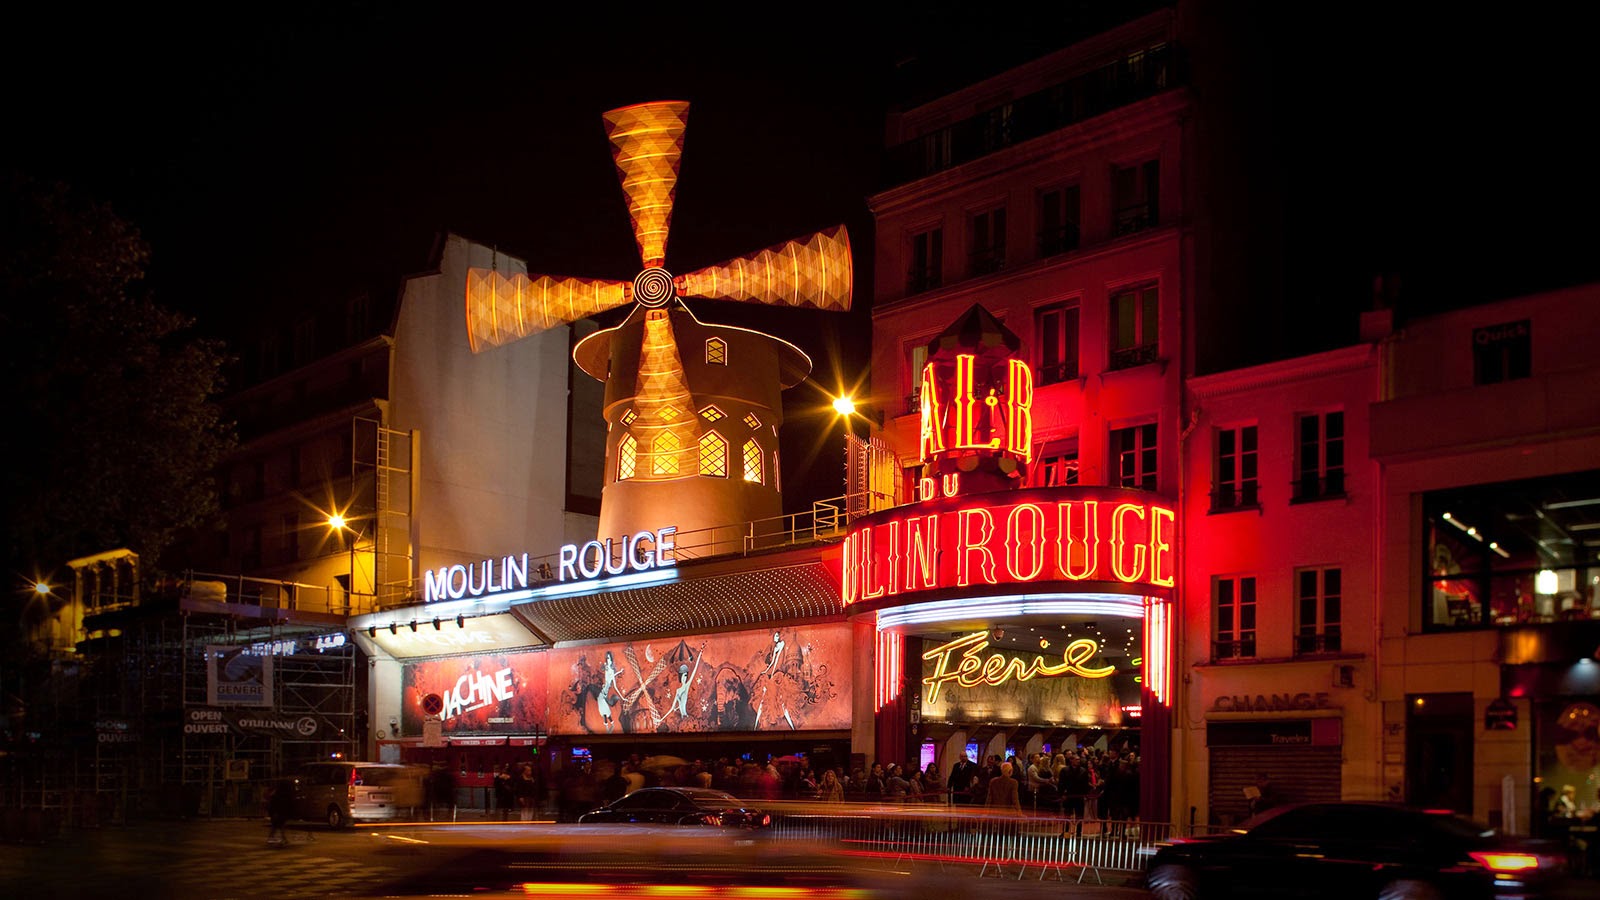 Ladies and gentlemen, welcome to the Moulin Rouge